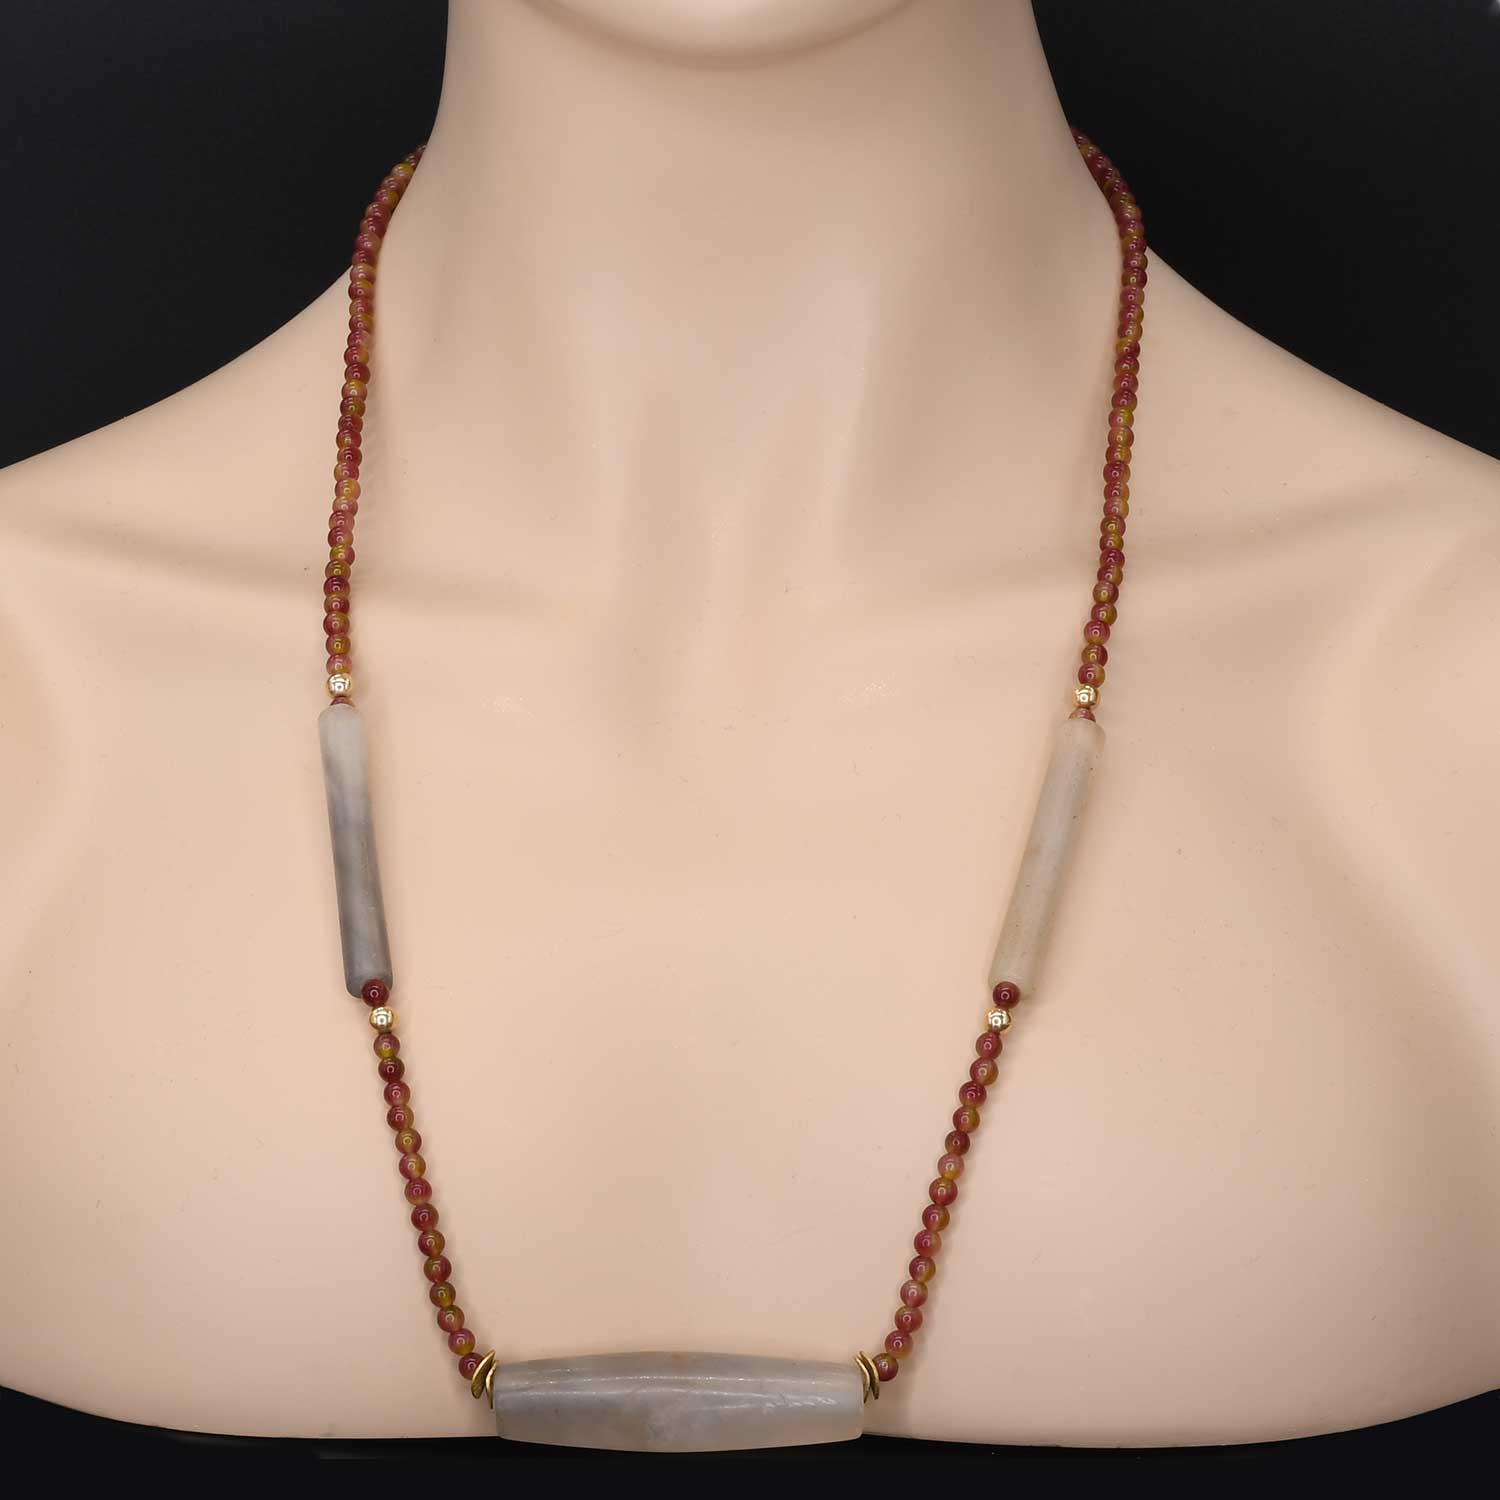 A Tairona Quartzite and Chalcedony Bead Necklace, ca. 800 - 1500 CE